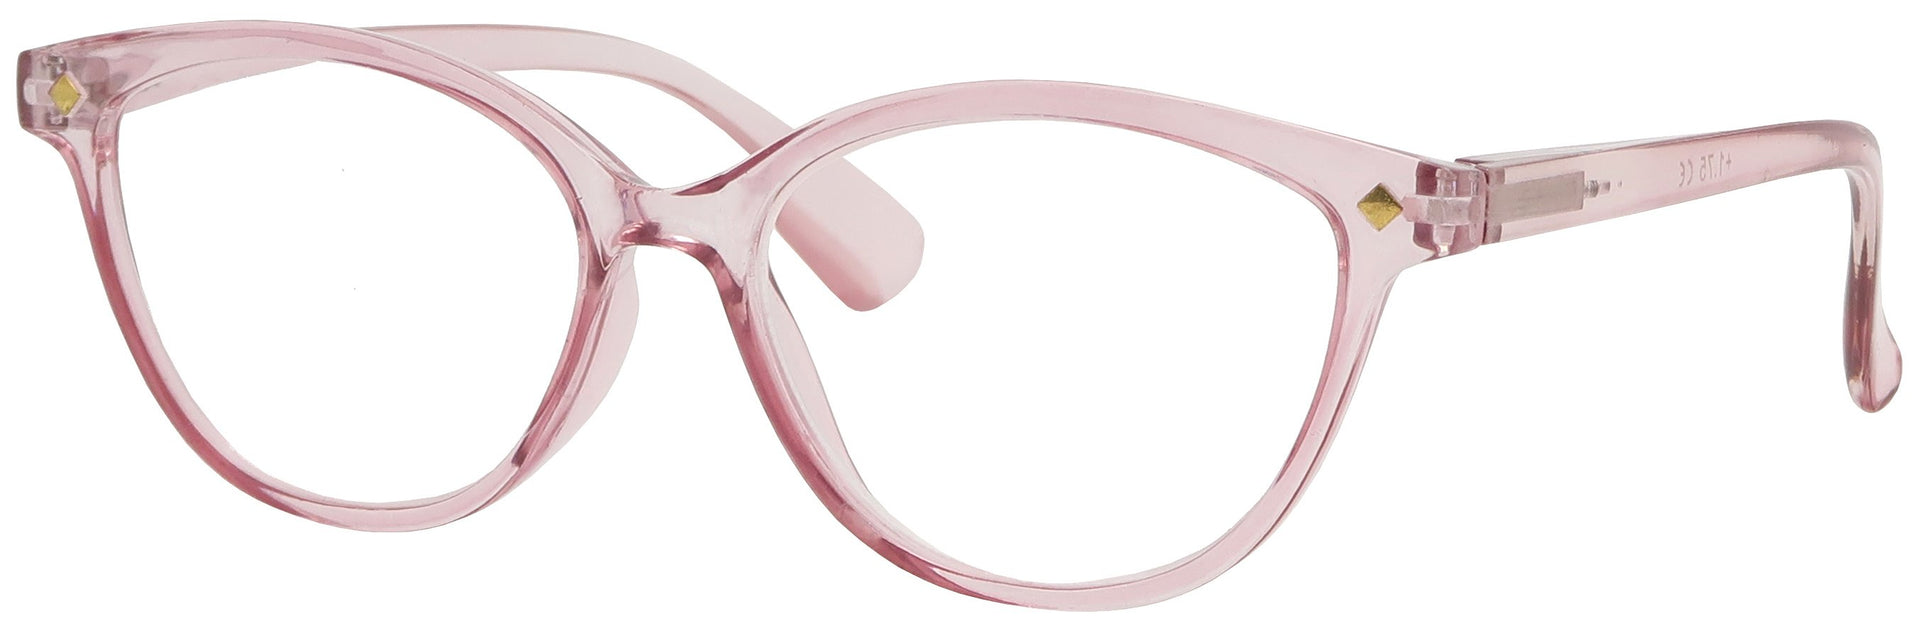 ST1514R - Wholesale Women's Crystal Cat Eye Reading Glasses in Pink